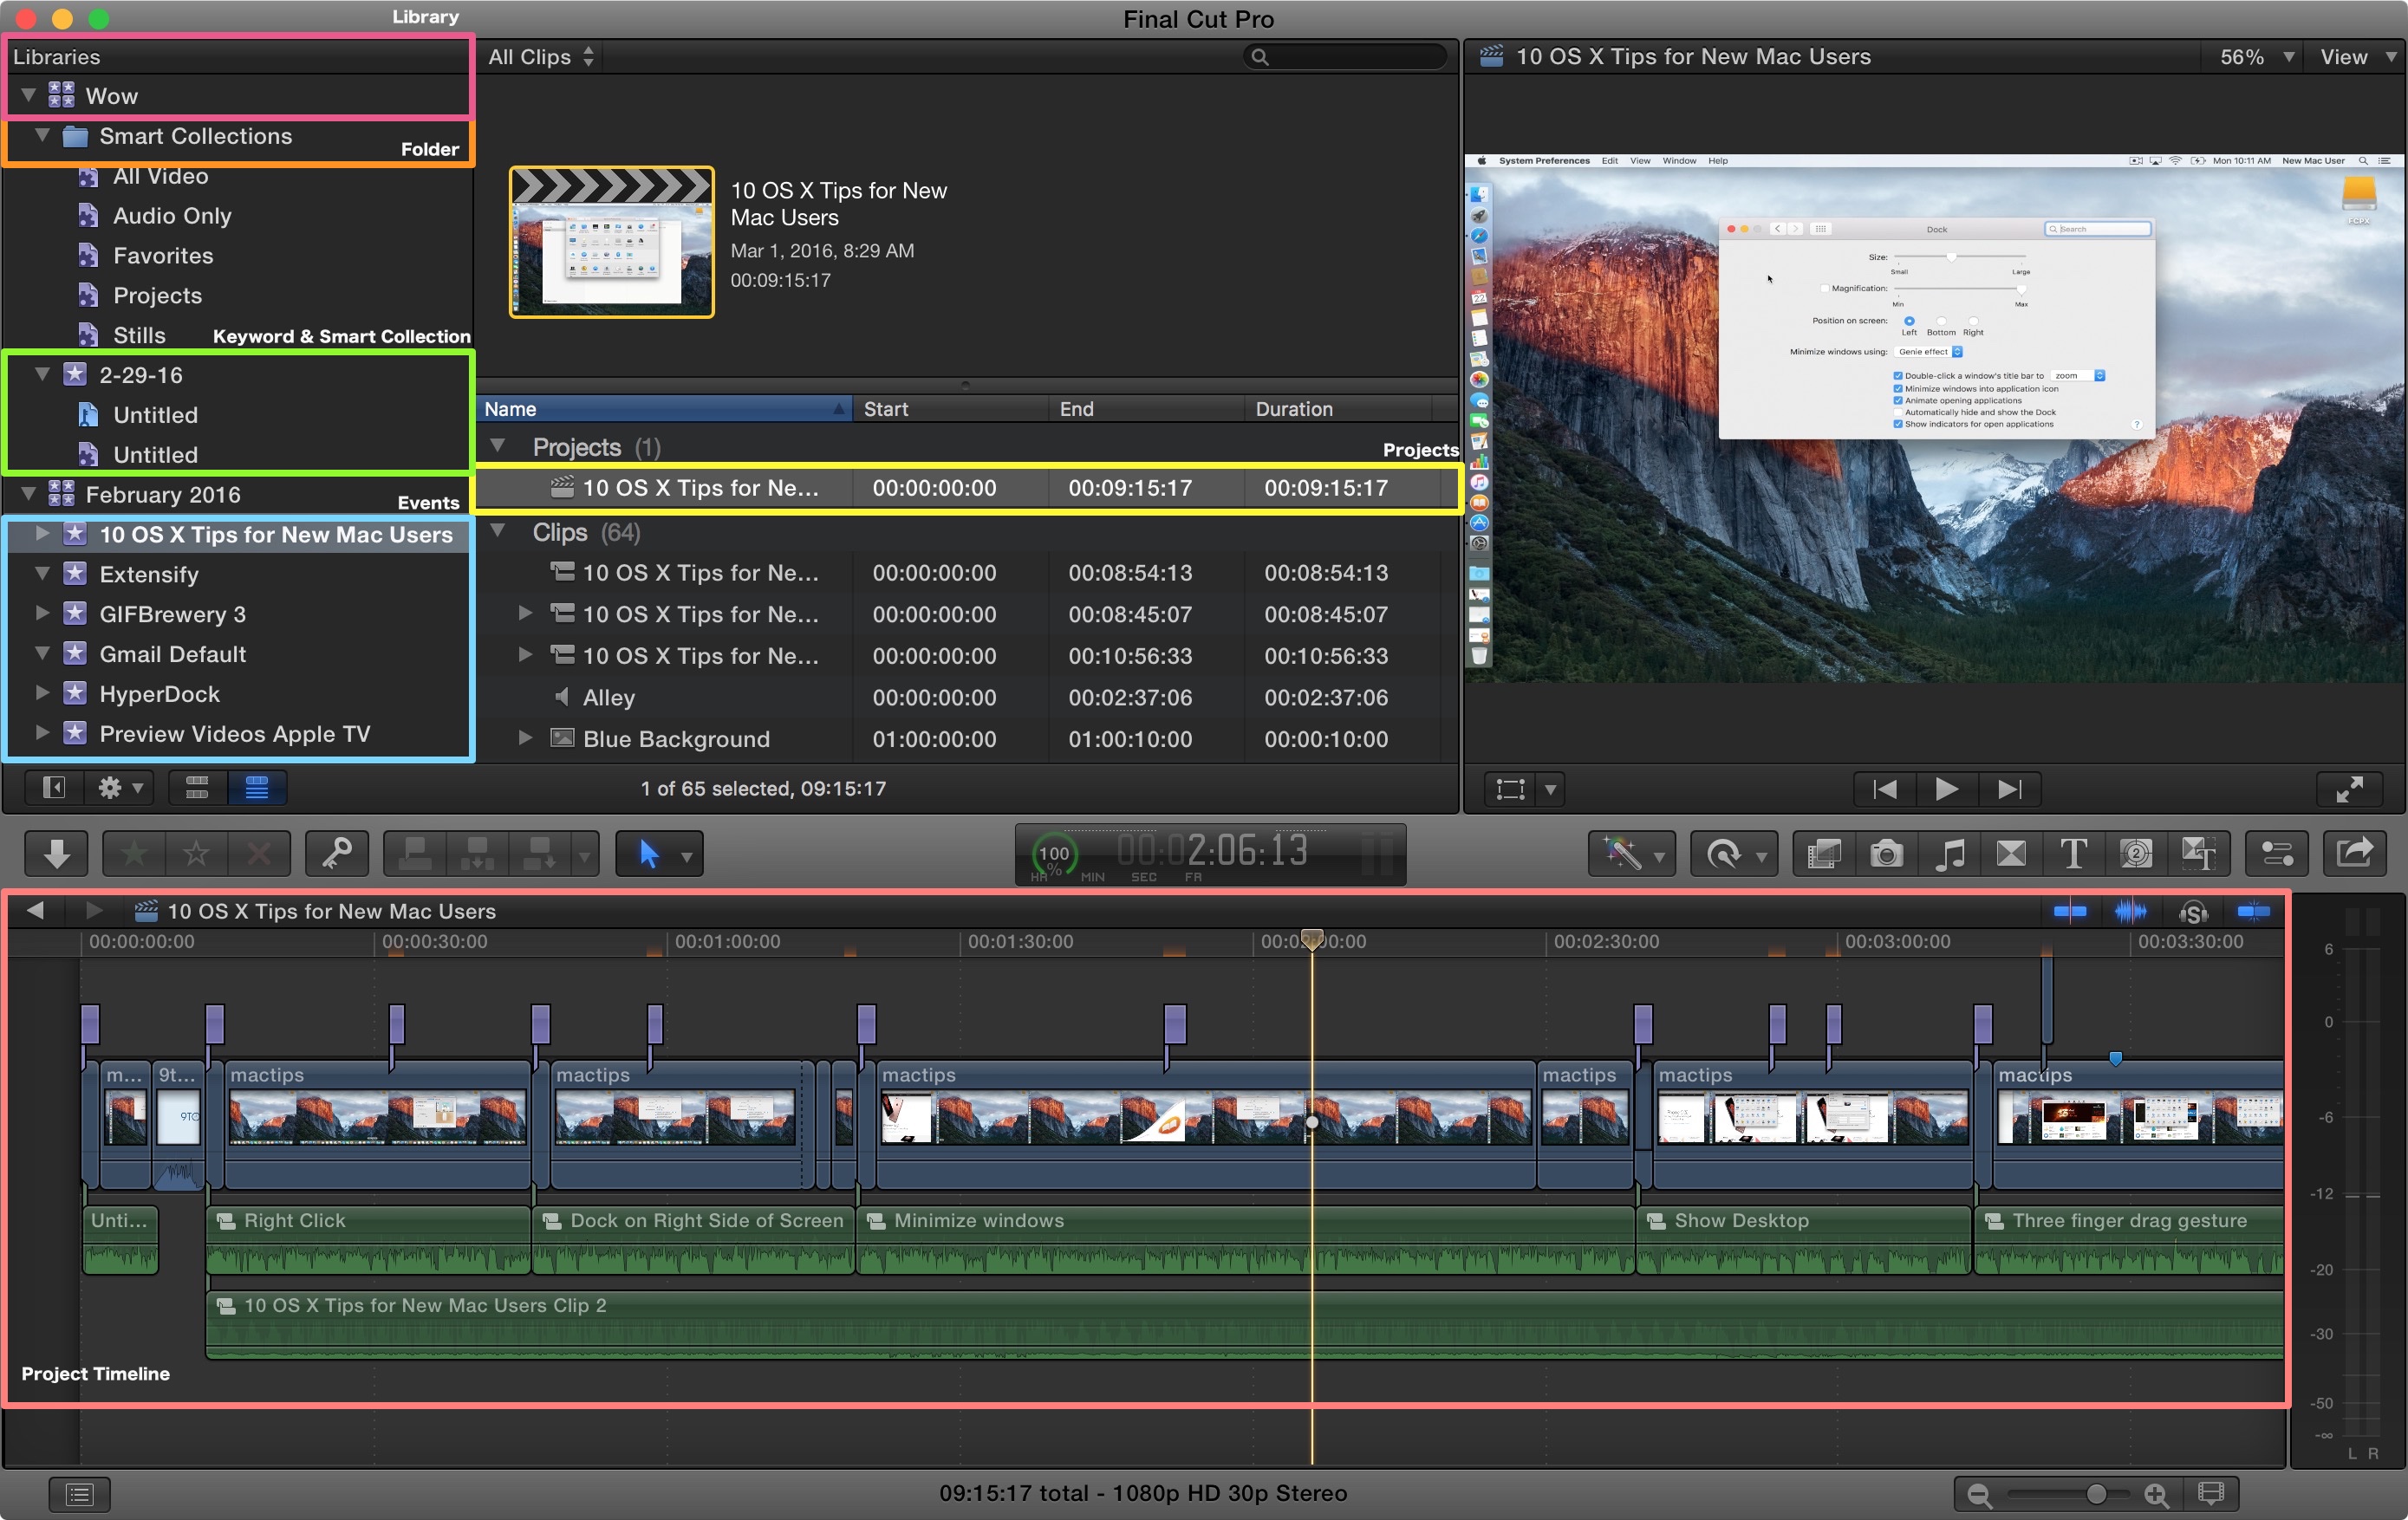 Final Cut Pro X: Getting started with Library management and